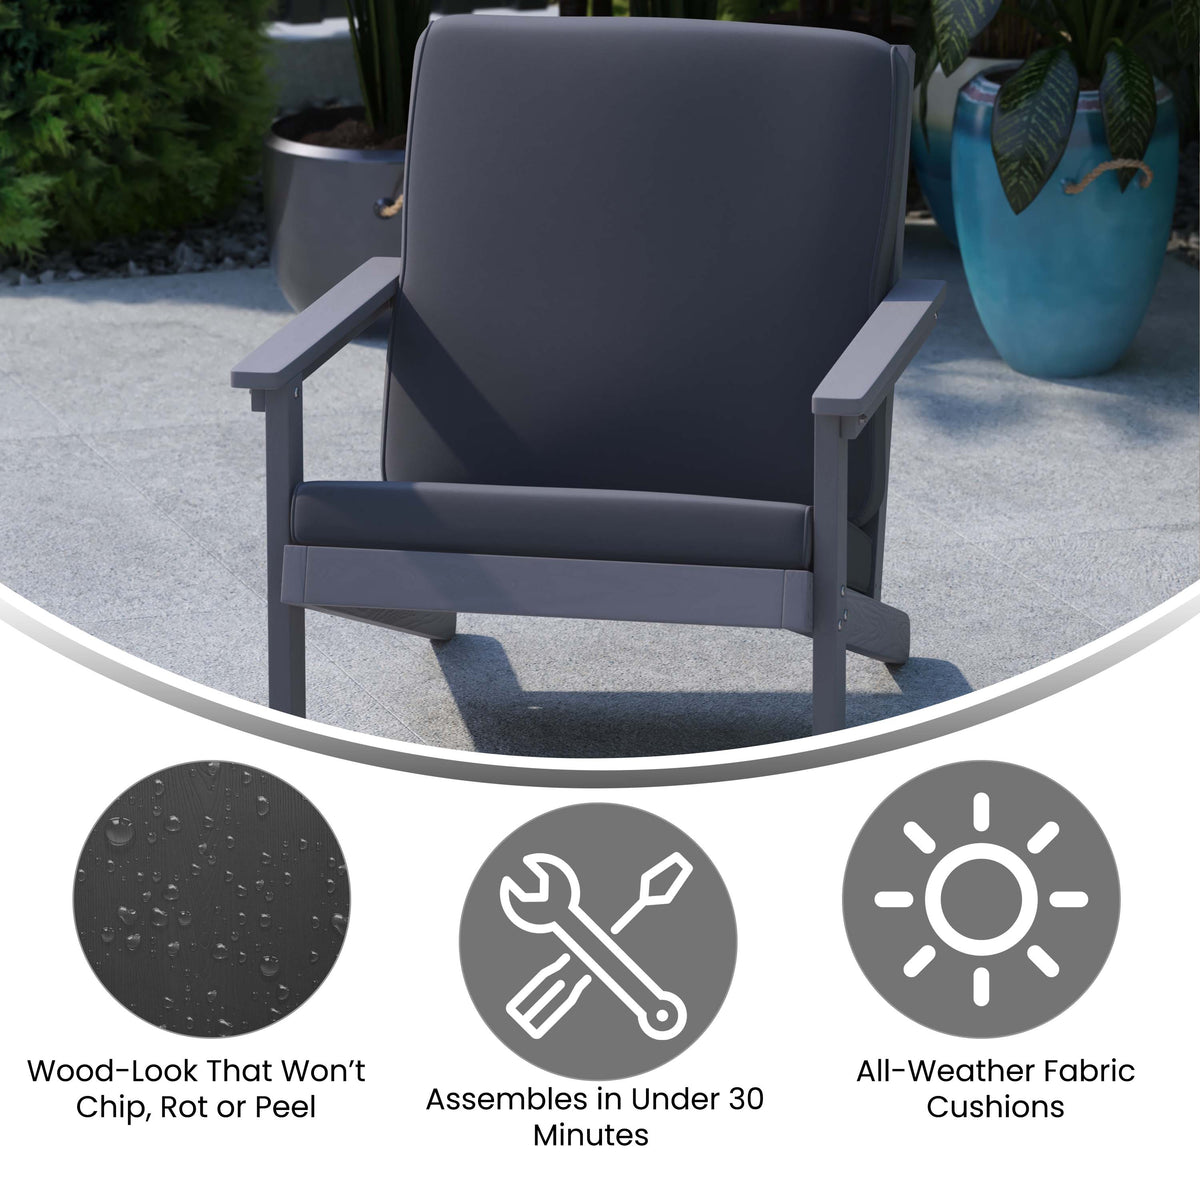 Gray |#| All-Weather Poly Resin Adirondack Style Chair & Cushions - Gray/Gray